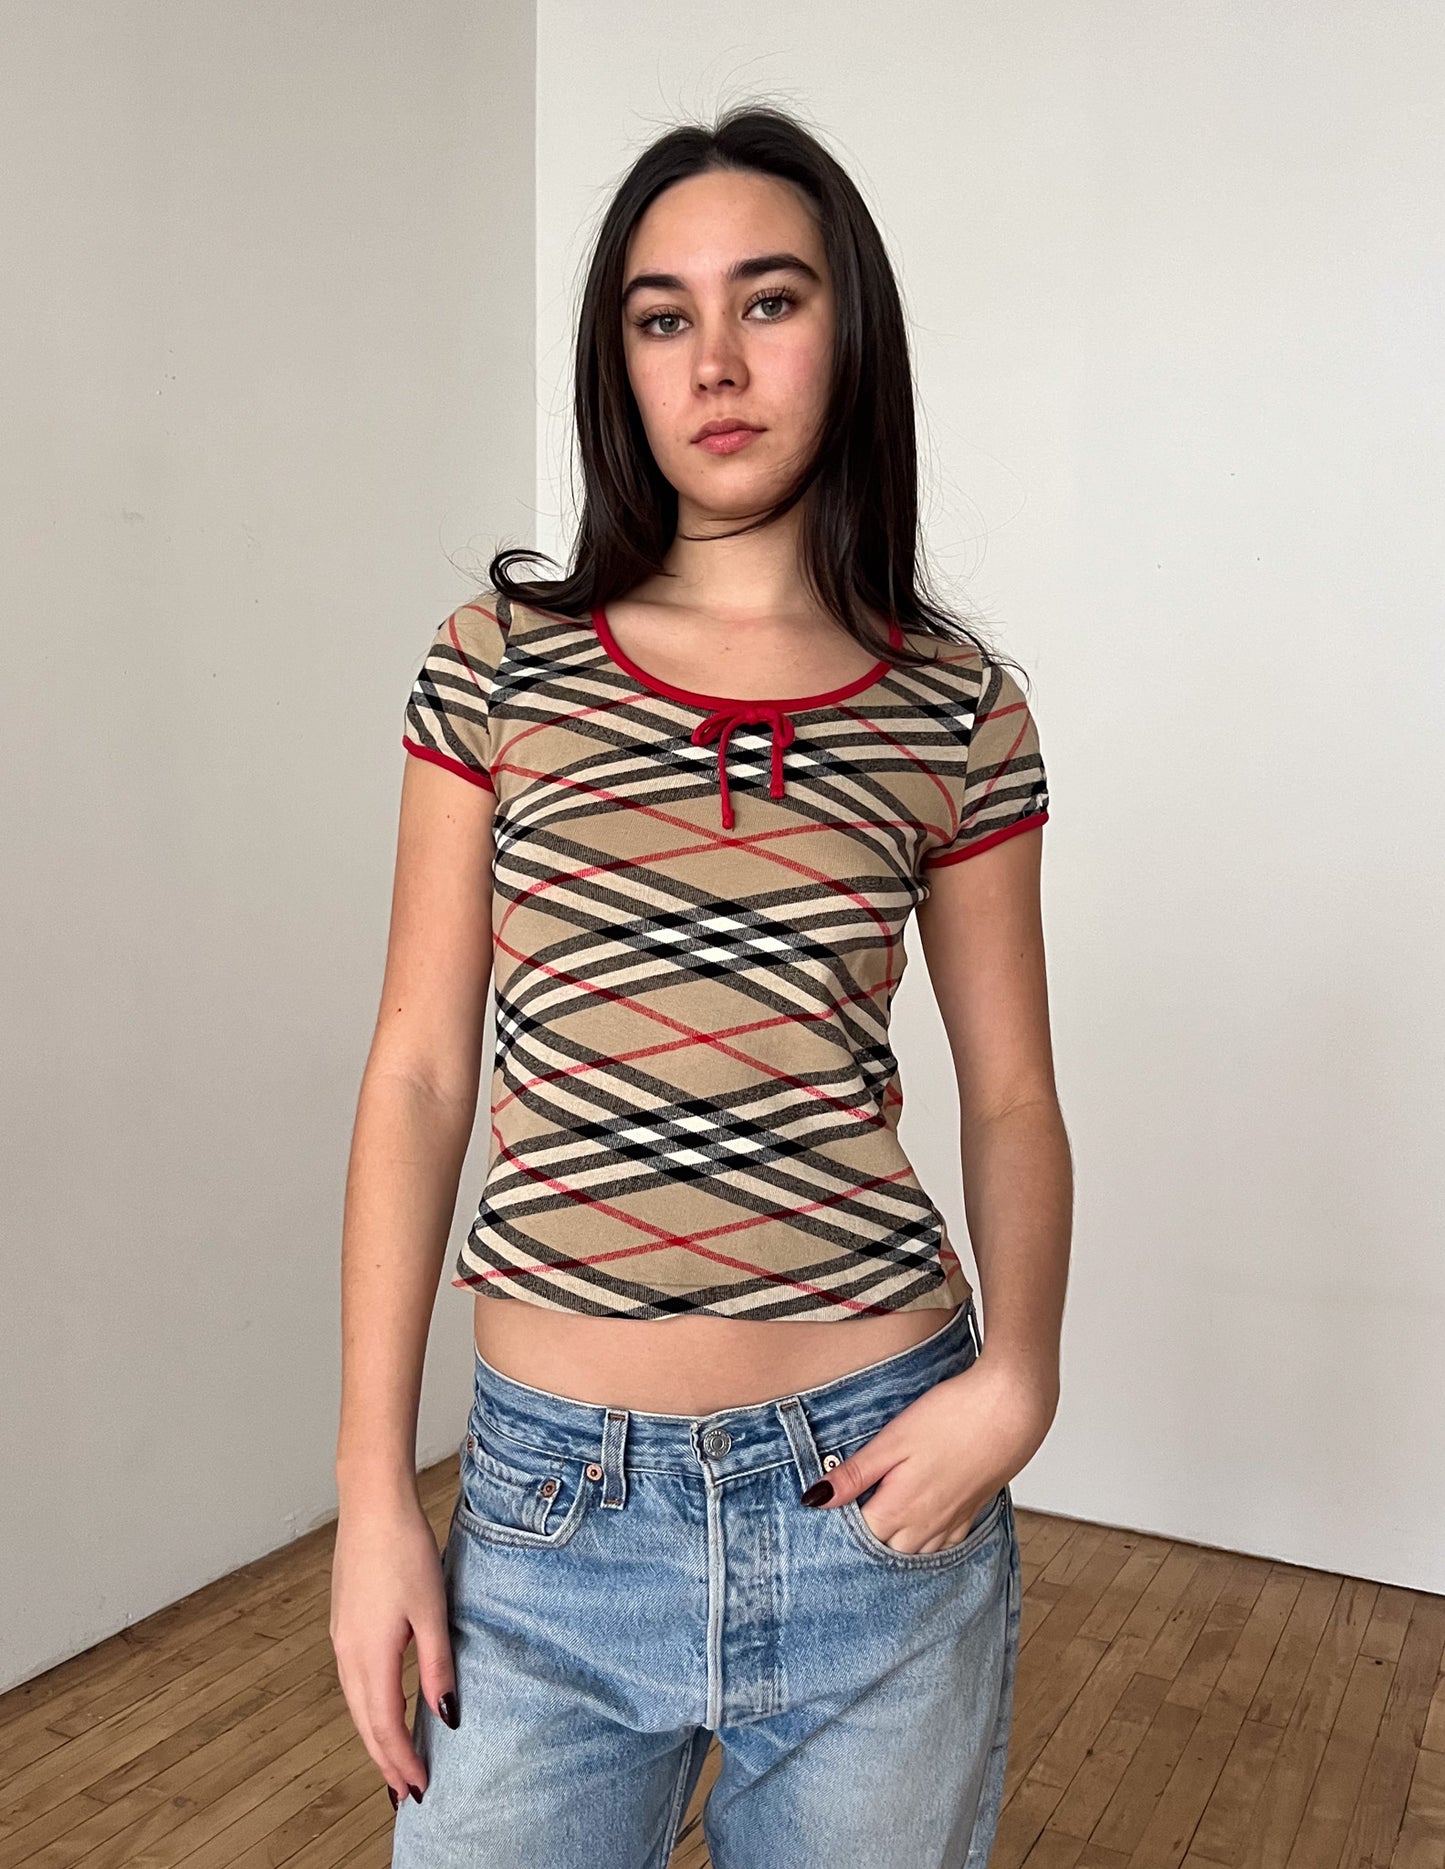 Burberry London Blue Label Red Trim Baby Tee